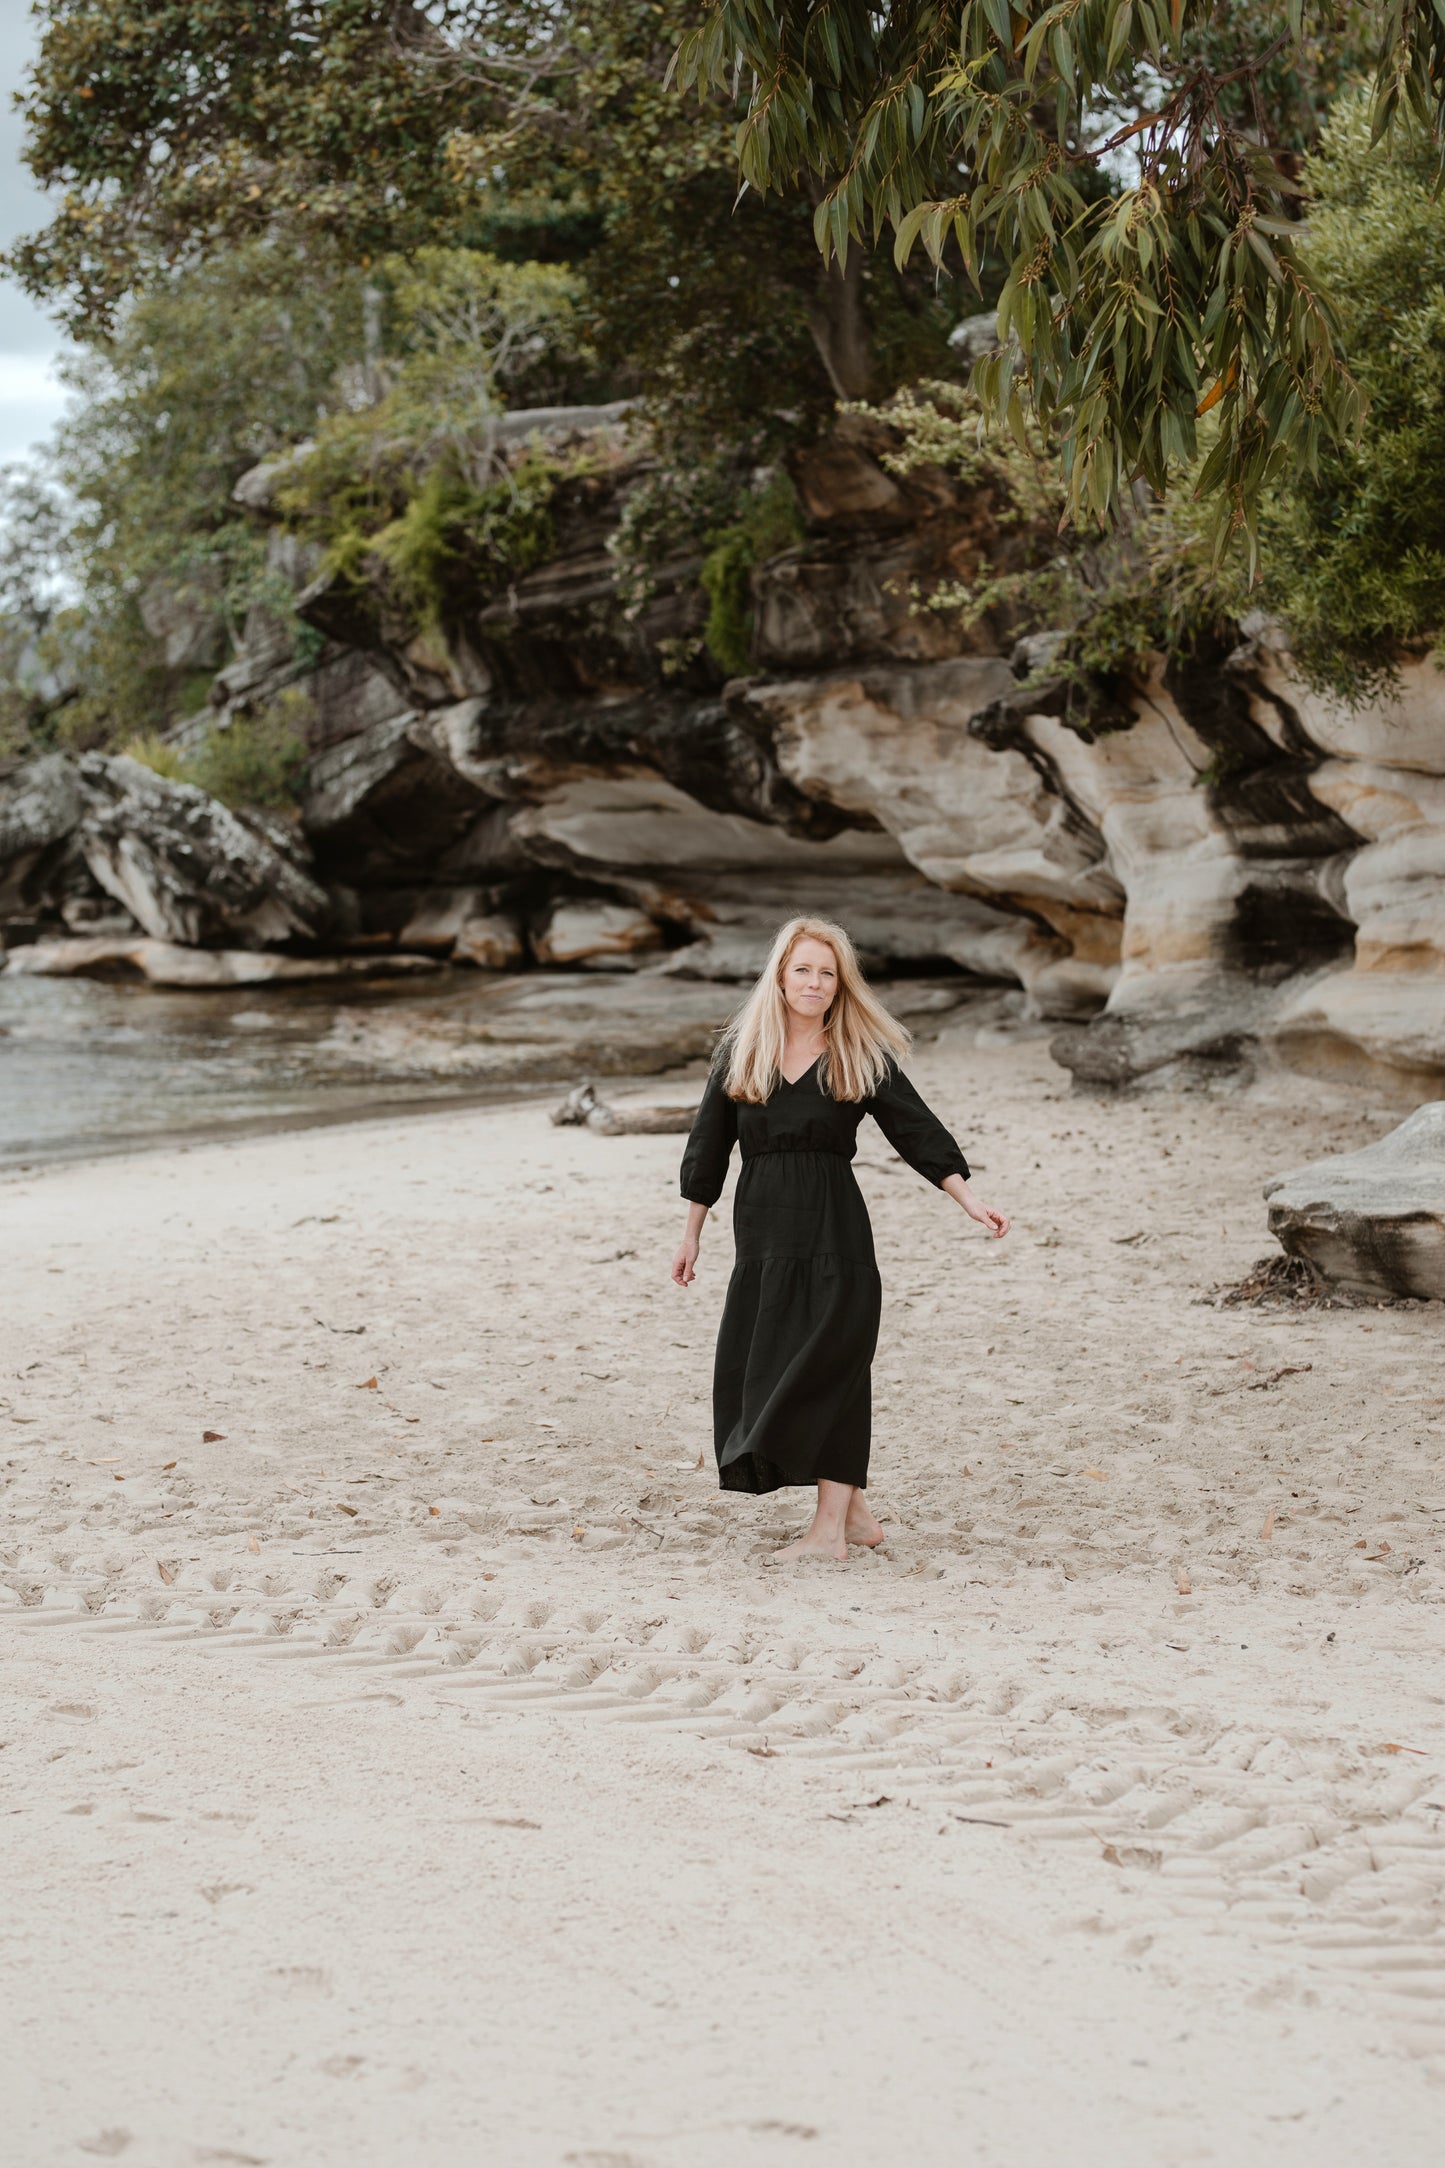 A petite woman on a beach, turning to face the camera. She is wearing a long black linen dress.